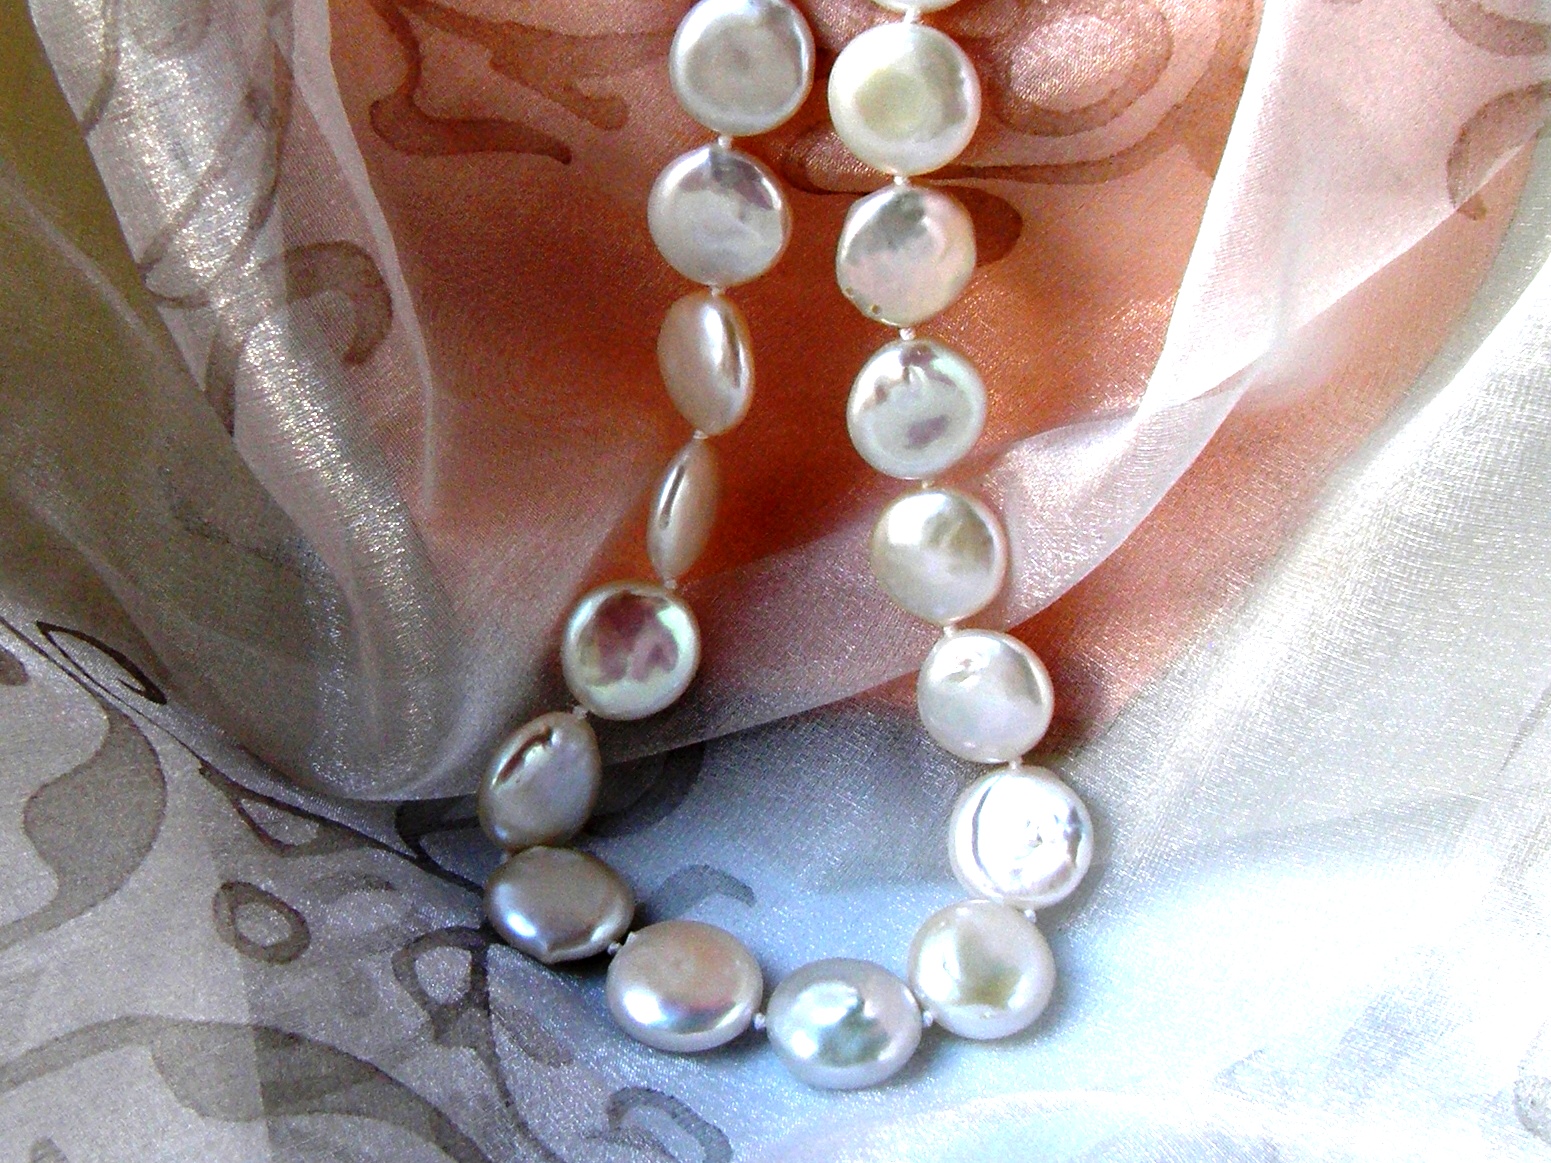 Freshwater Button shape Pearl Necklace fitted with a Sterling Silver feature bolt ring to compliment shape of the pearls.